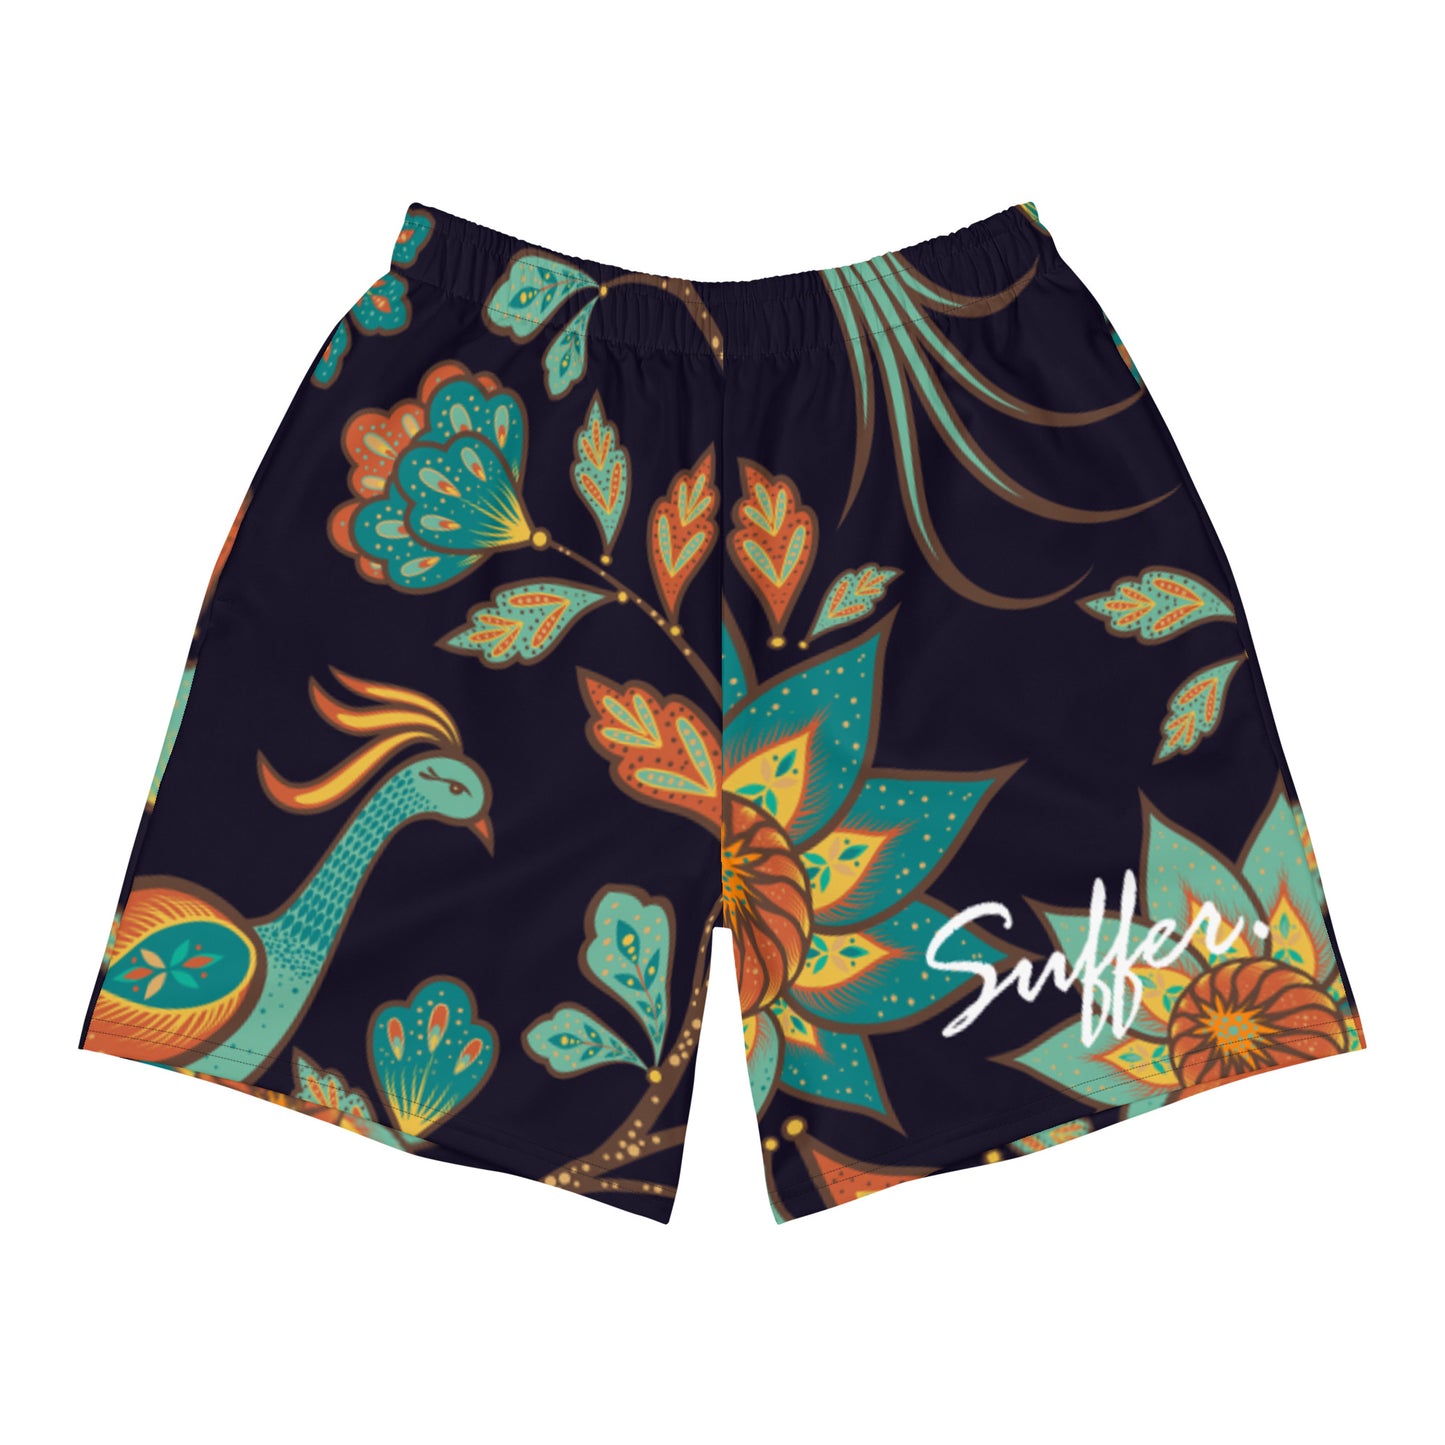 Peacock Athletic Shorts